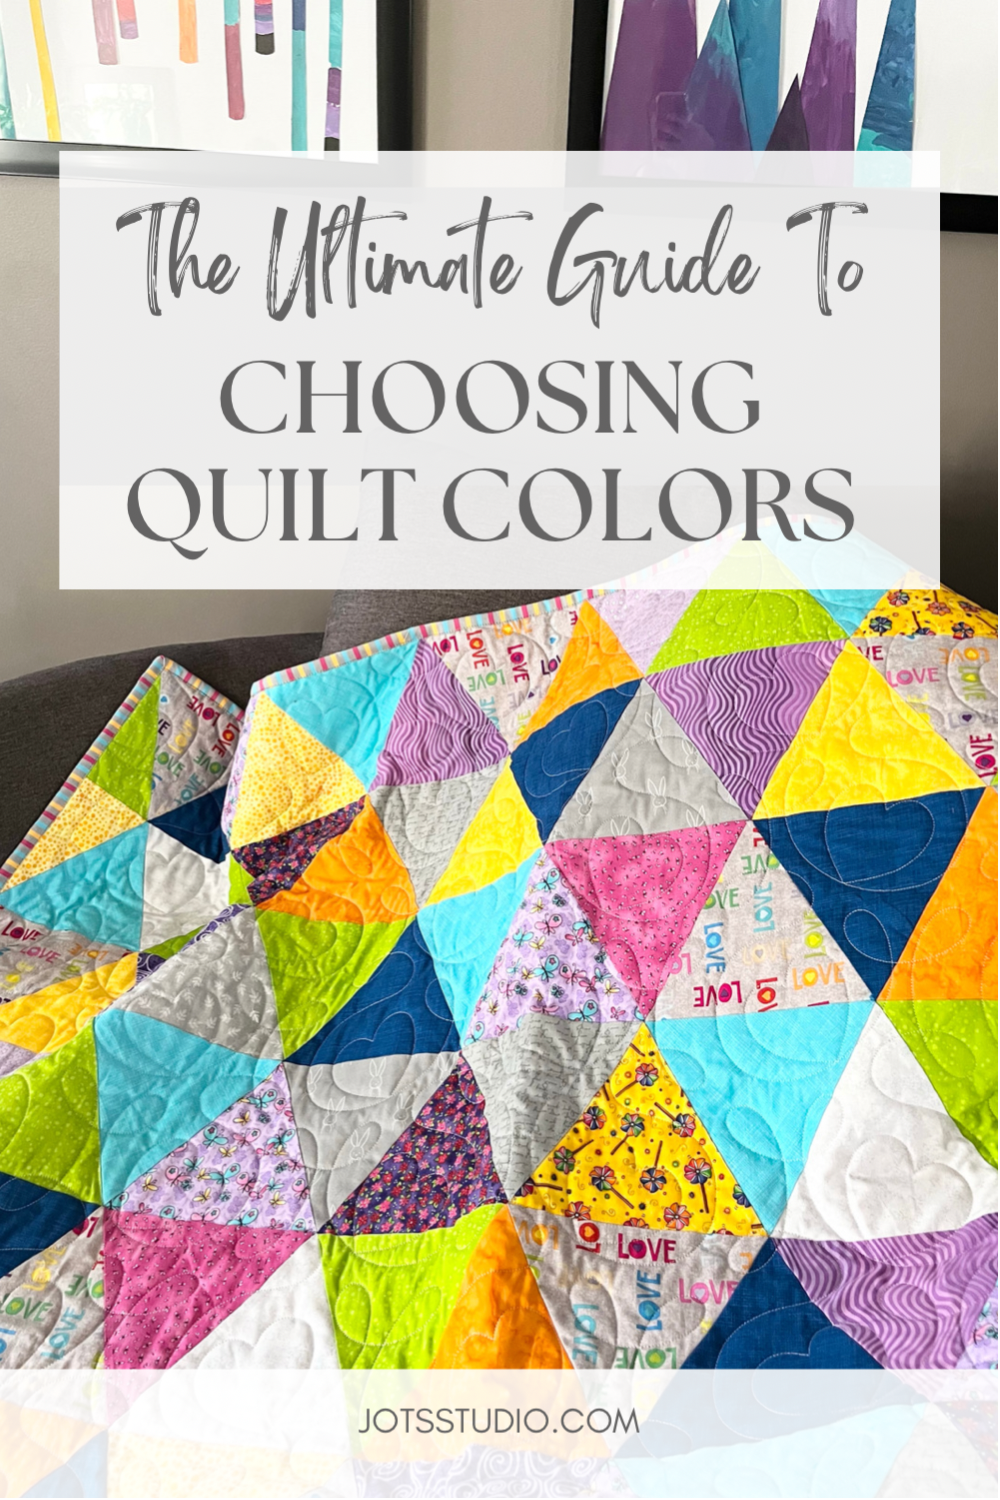 Your Ultimate Guide to Choosing Quilt Colors